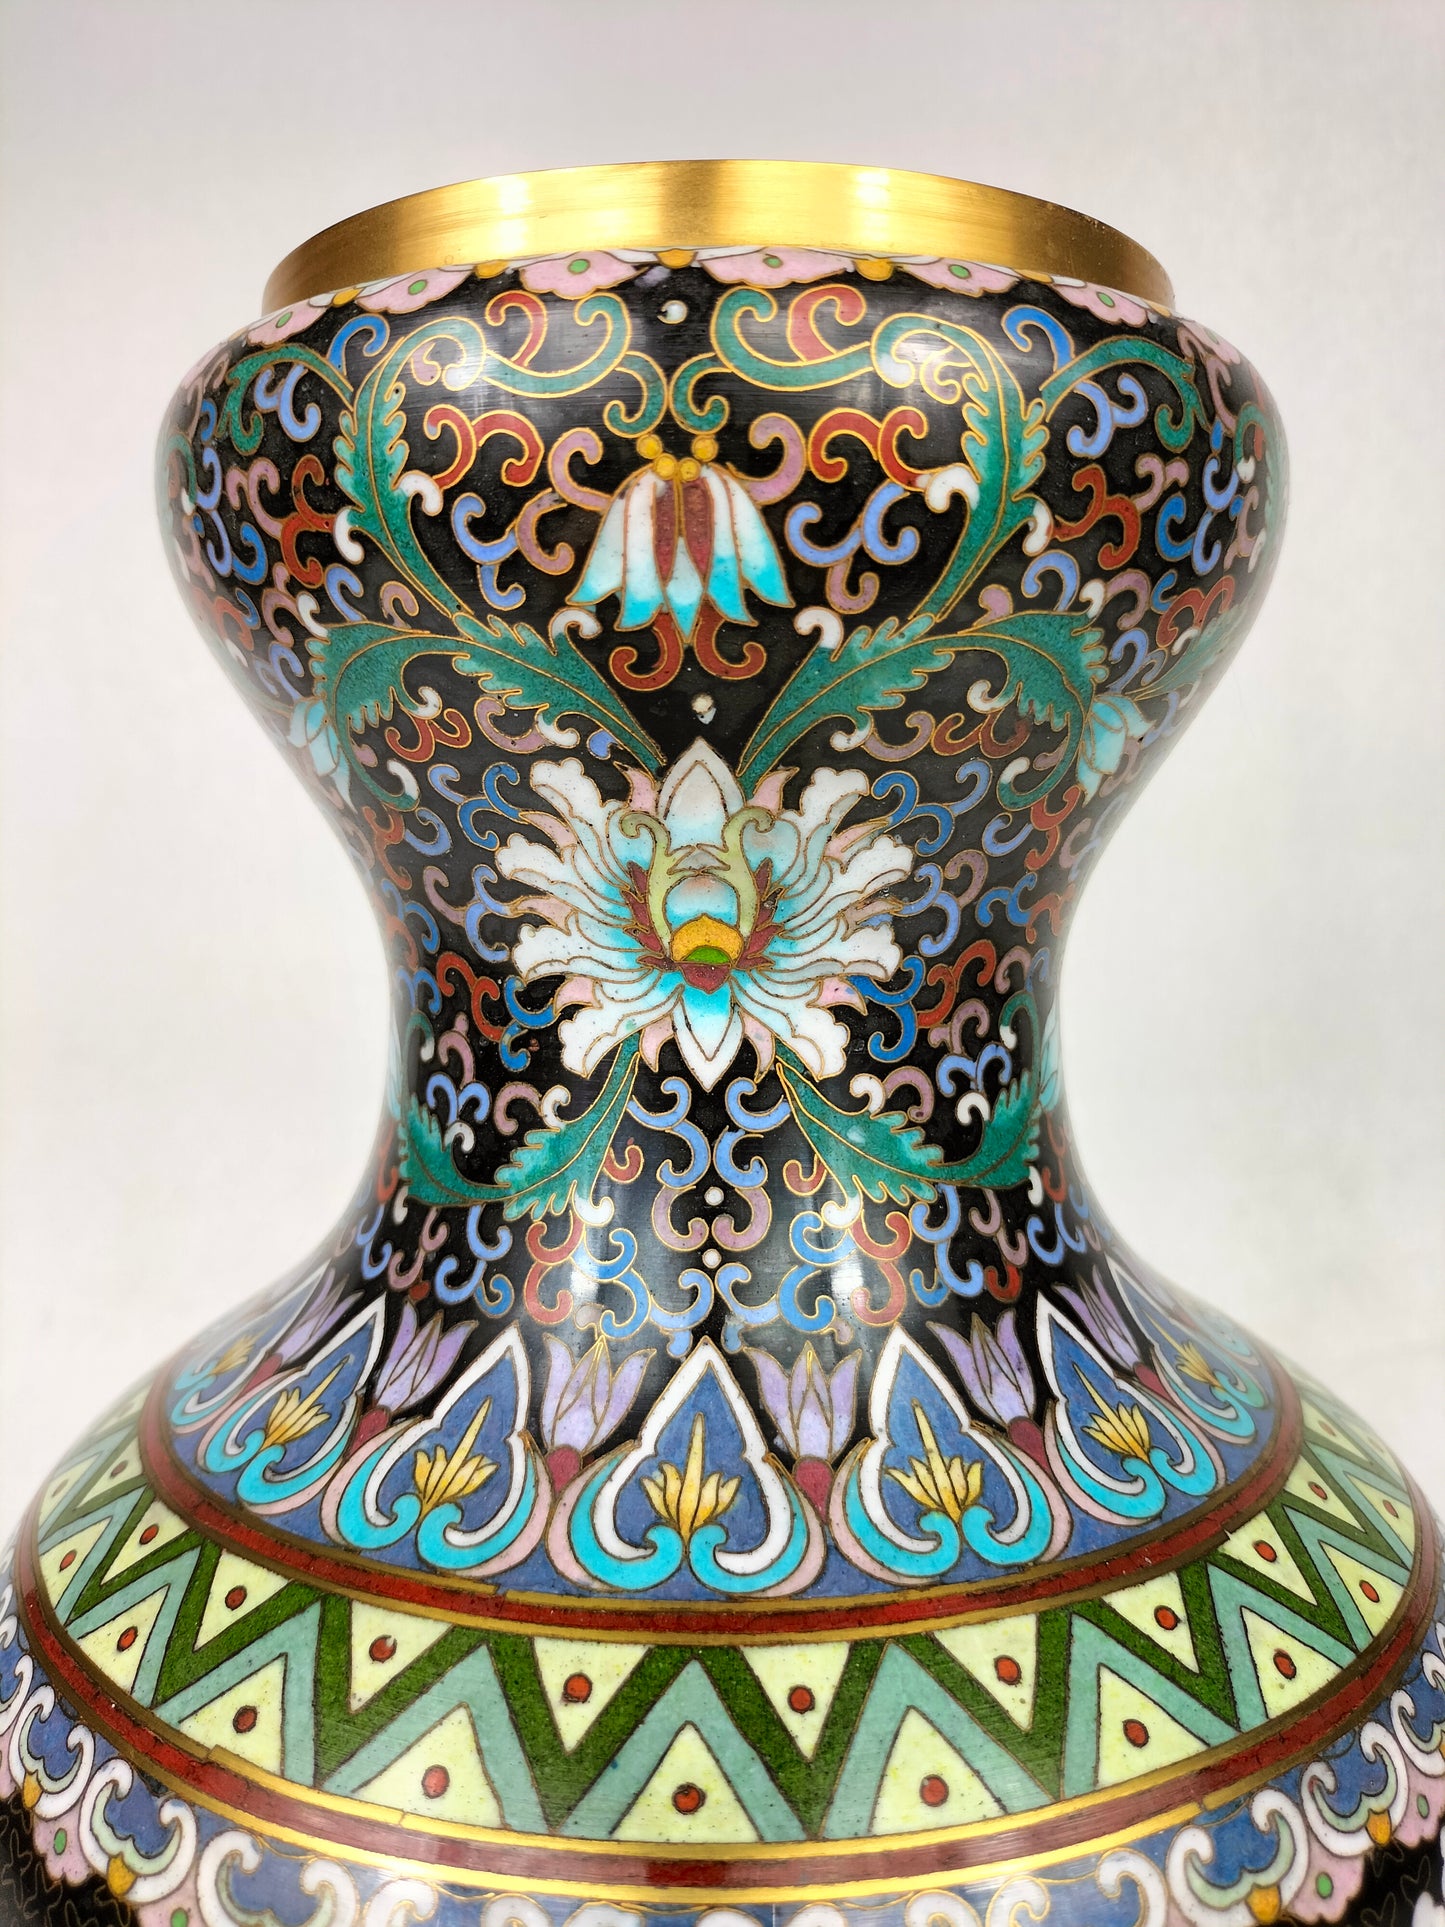 Vintage Chinese cloisonne vase decorated with flowers and butterflies // Mid 20th century